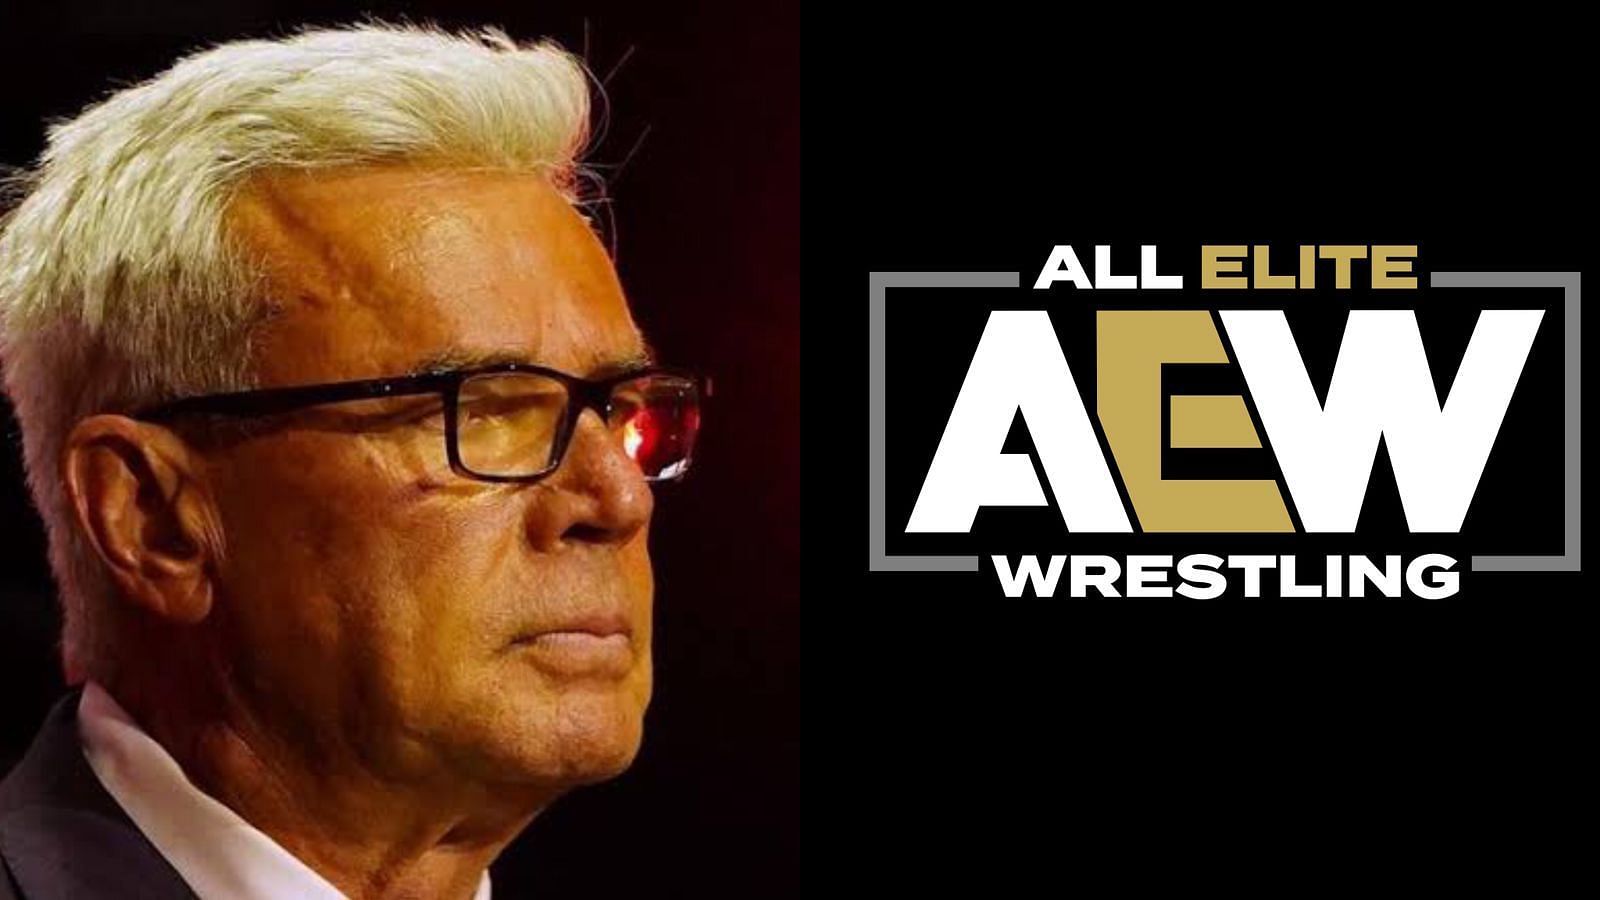 Eric Bischoff is the former general manager of WWE RAW